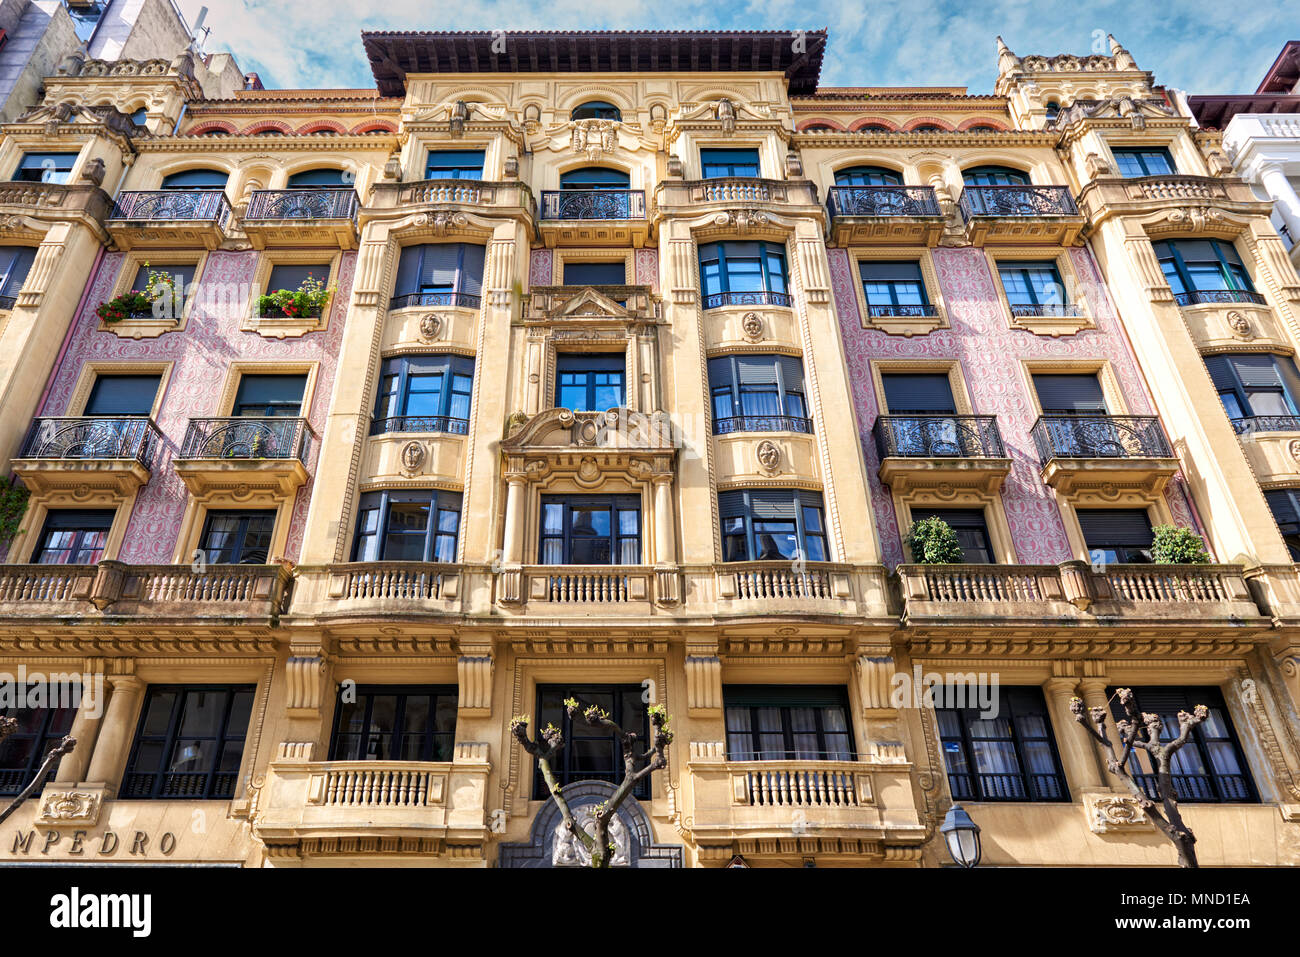 Detail of the Building at El Cano Street, Bilbao, Biscay, Basque Country, Euskadi, Euskal Herria, Spain, Europe- Stock Photo